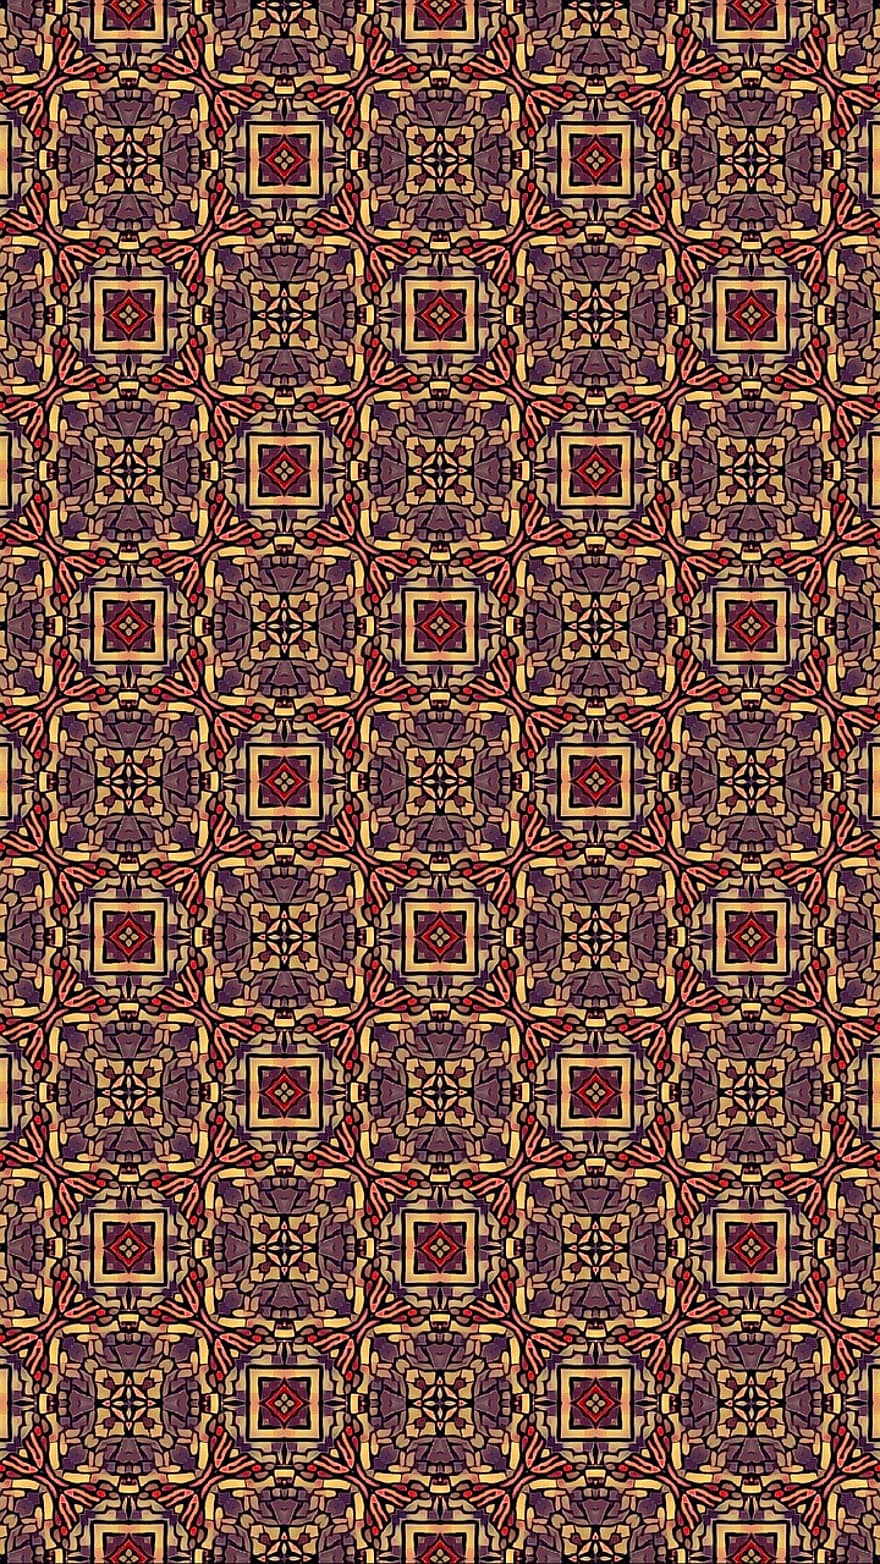 Pattern, Decoration, Art, Ornate, Geometric, Seamless, Background, Greeting Card, Wrapping Paper, Mosaic, Texture